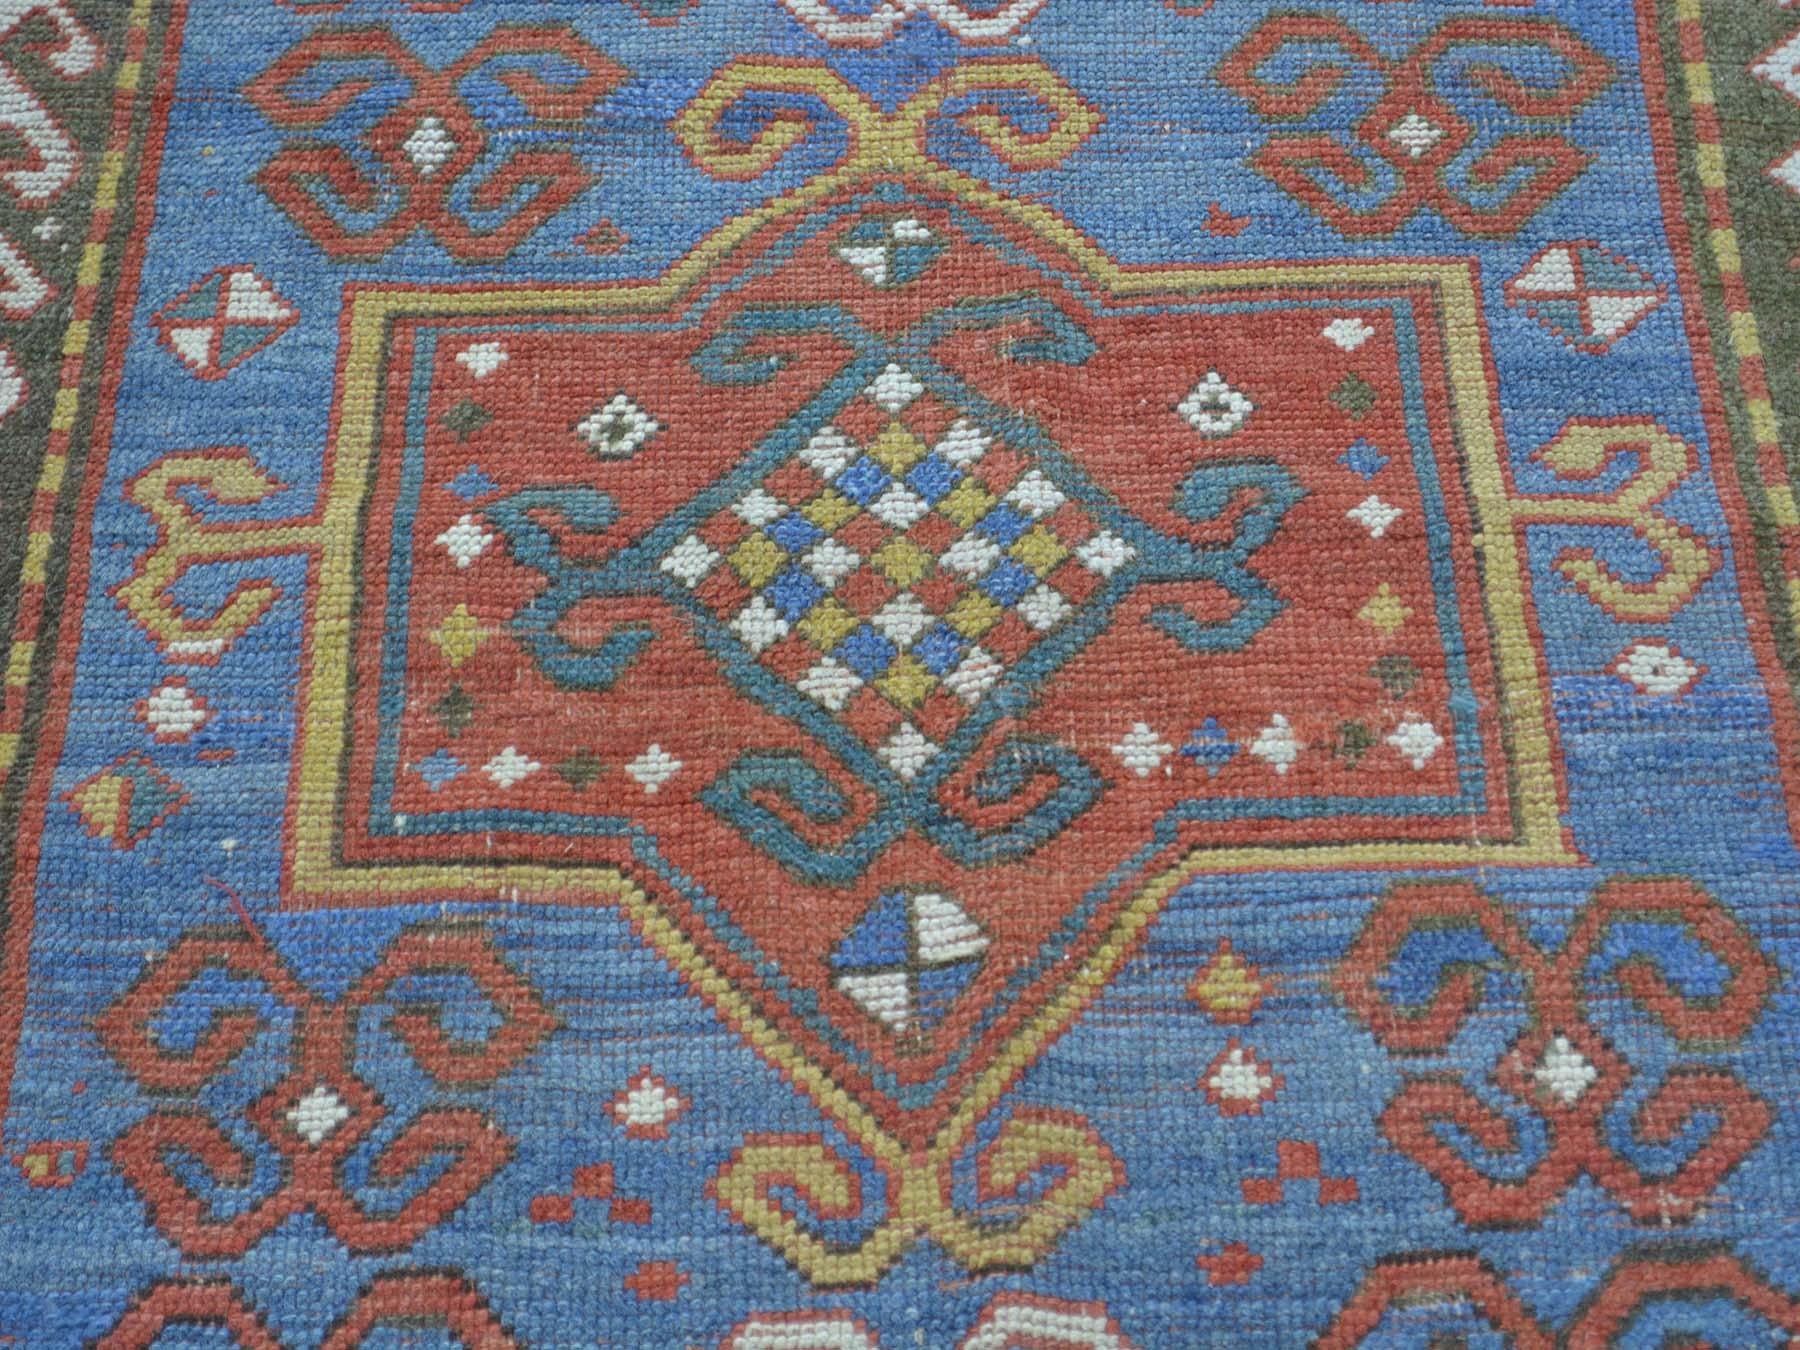 Russian Early 20th Century Antique Caucasian Hand Knotted Rug - 4'8